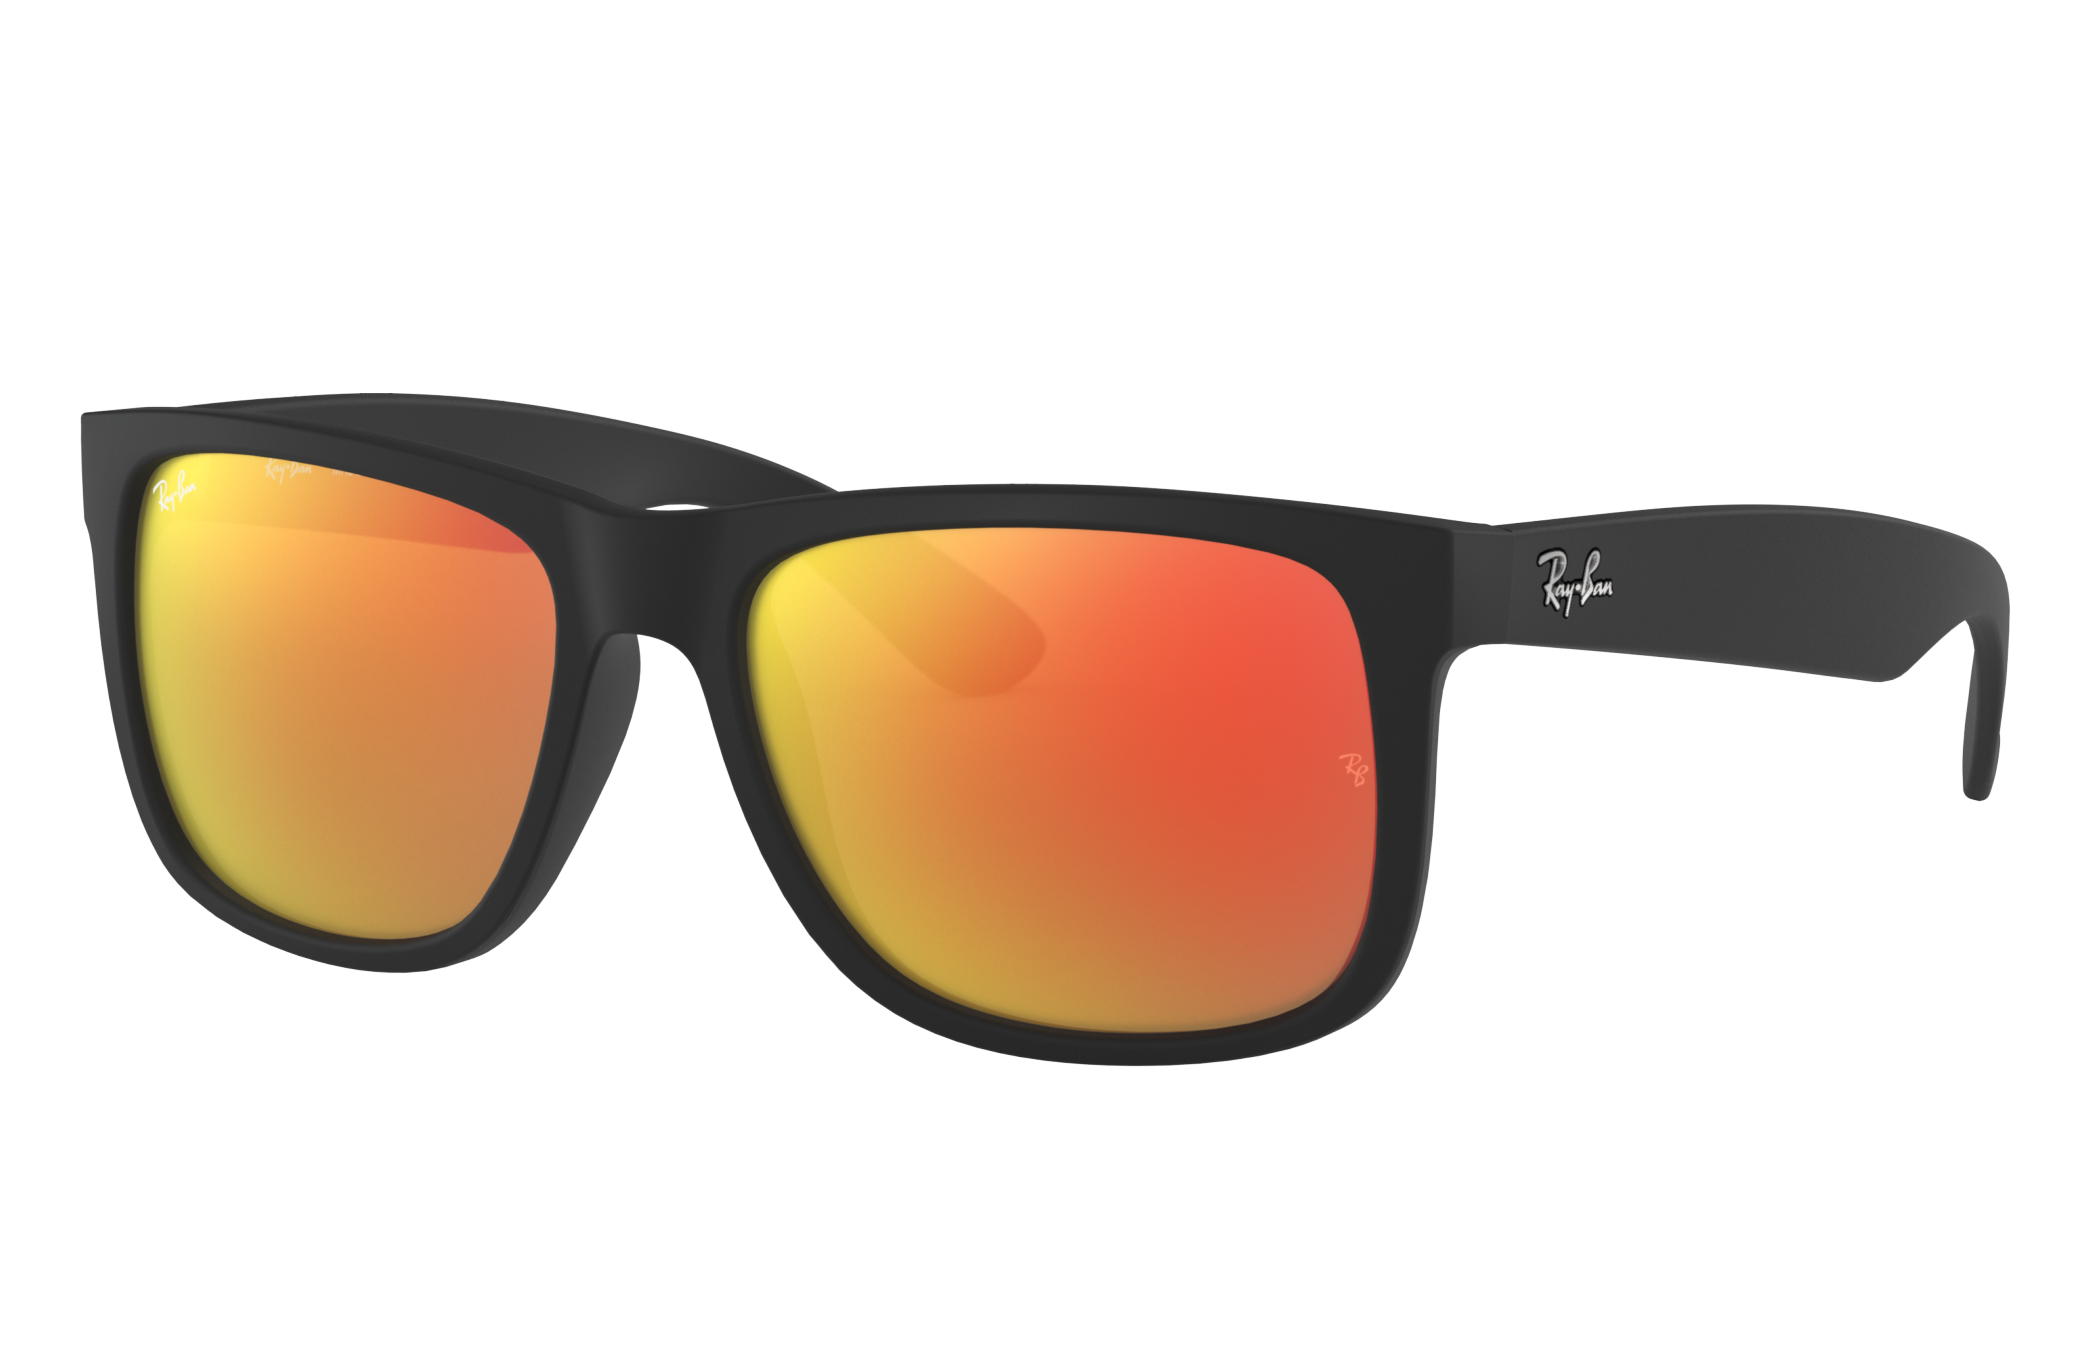 Arriba 52+ imagen ray ban sunglasses with colored lenses